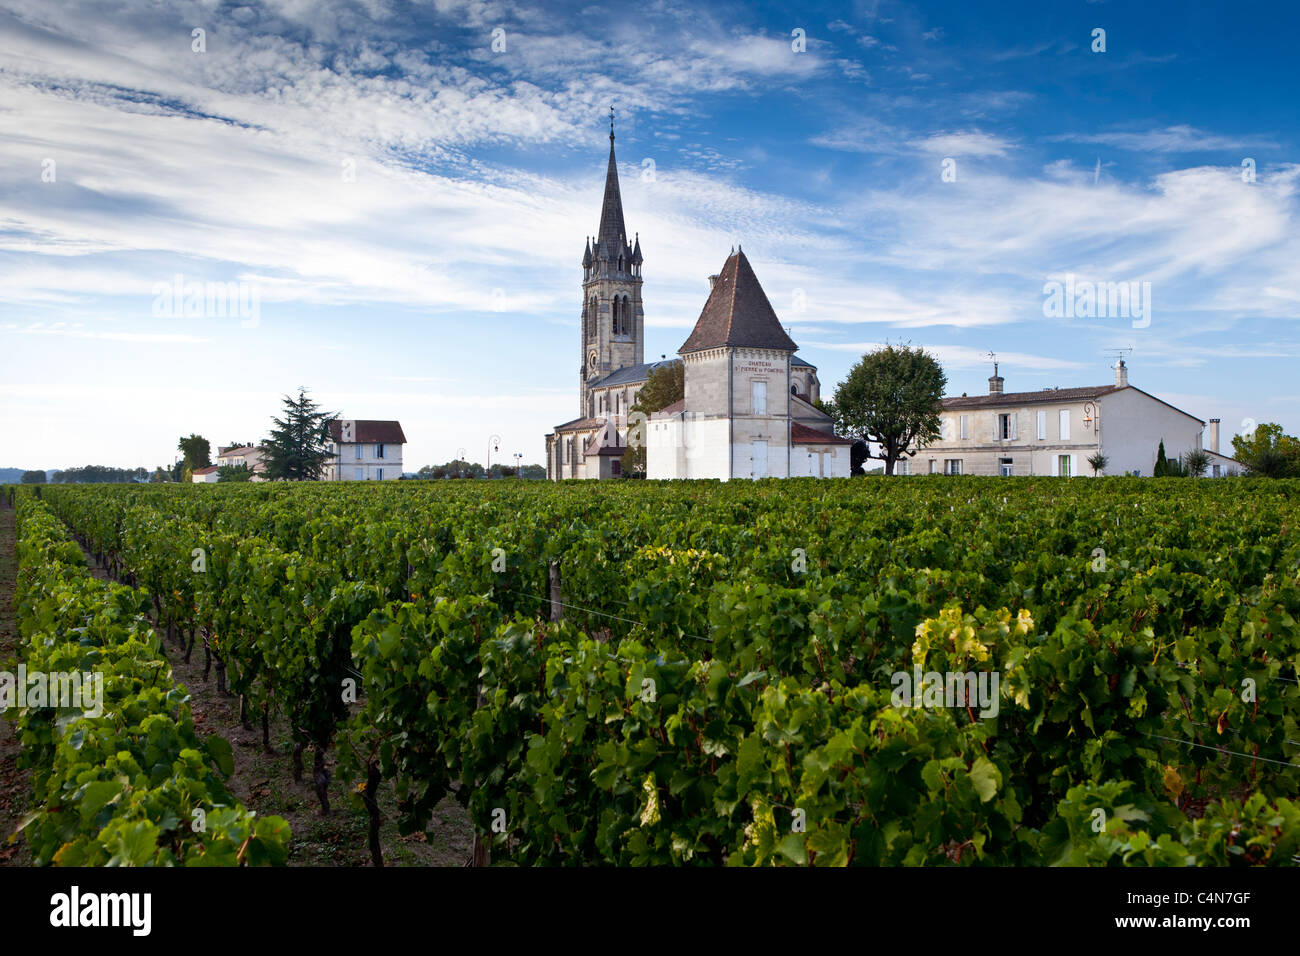 Village of Pomerol with vineyard, Chateau St Pierre and Church of St Jean in the Bordeaux wine region of France Stock Photo